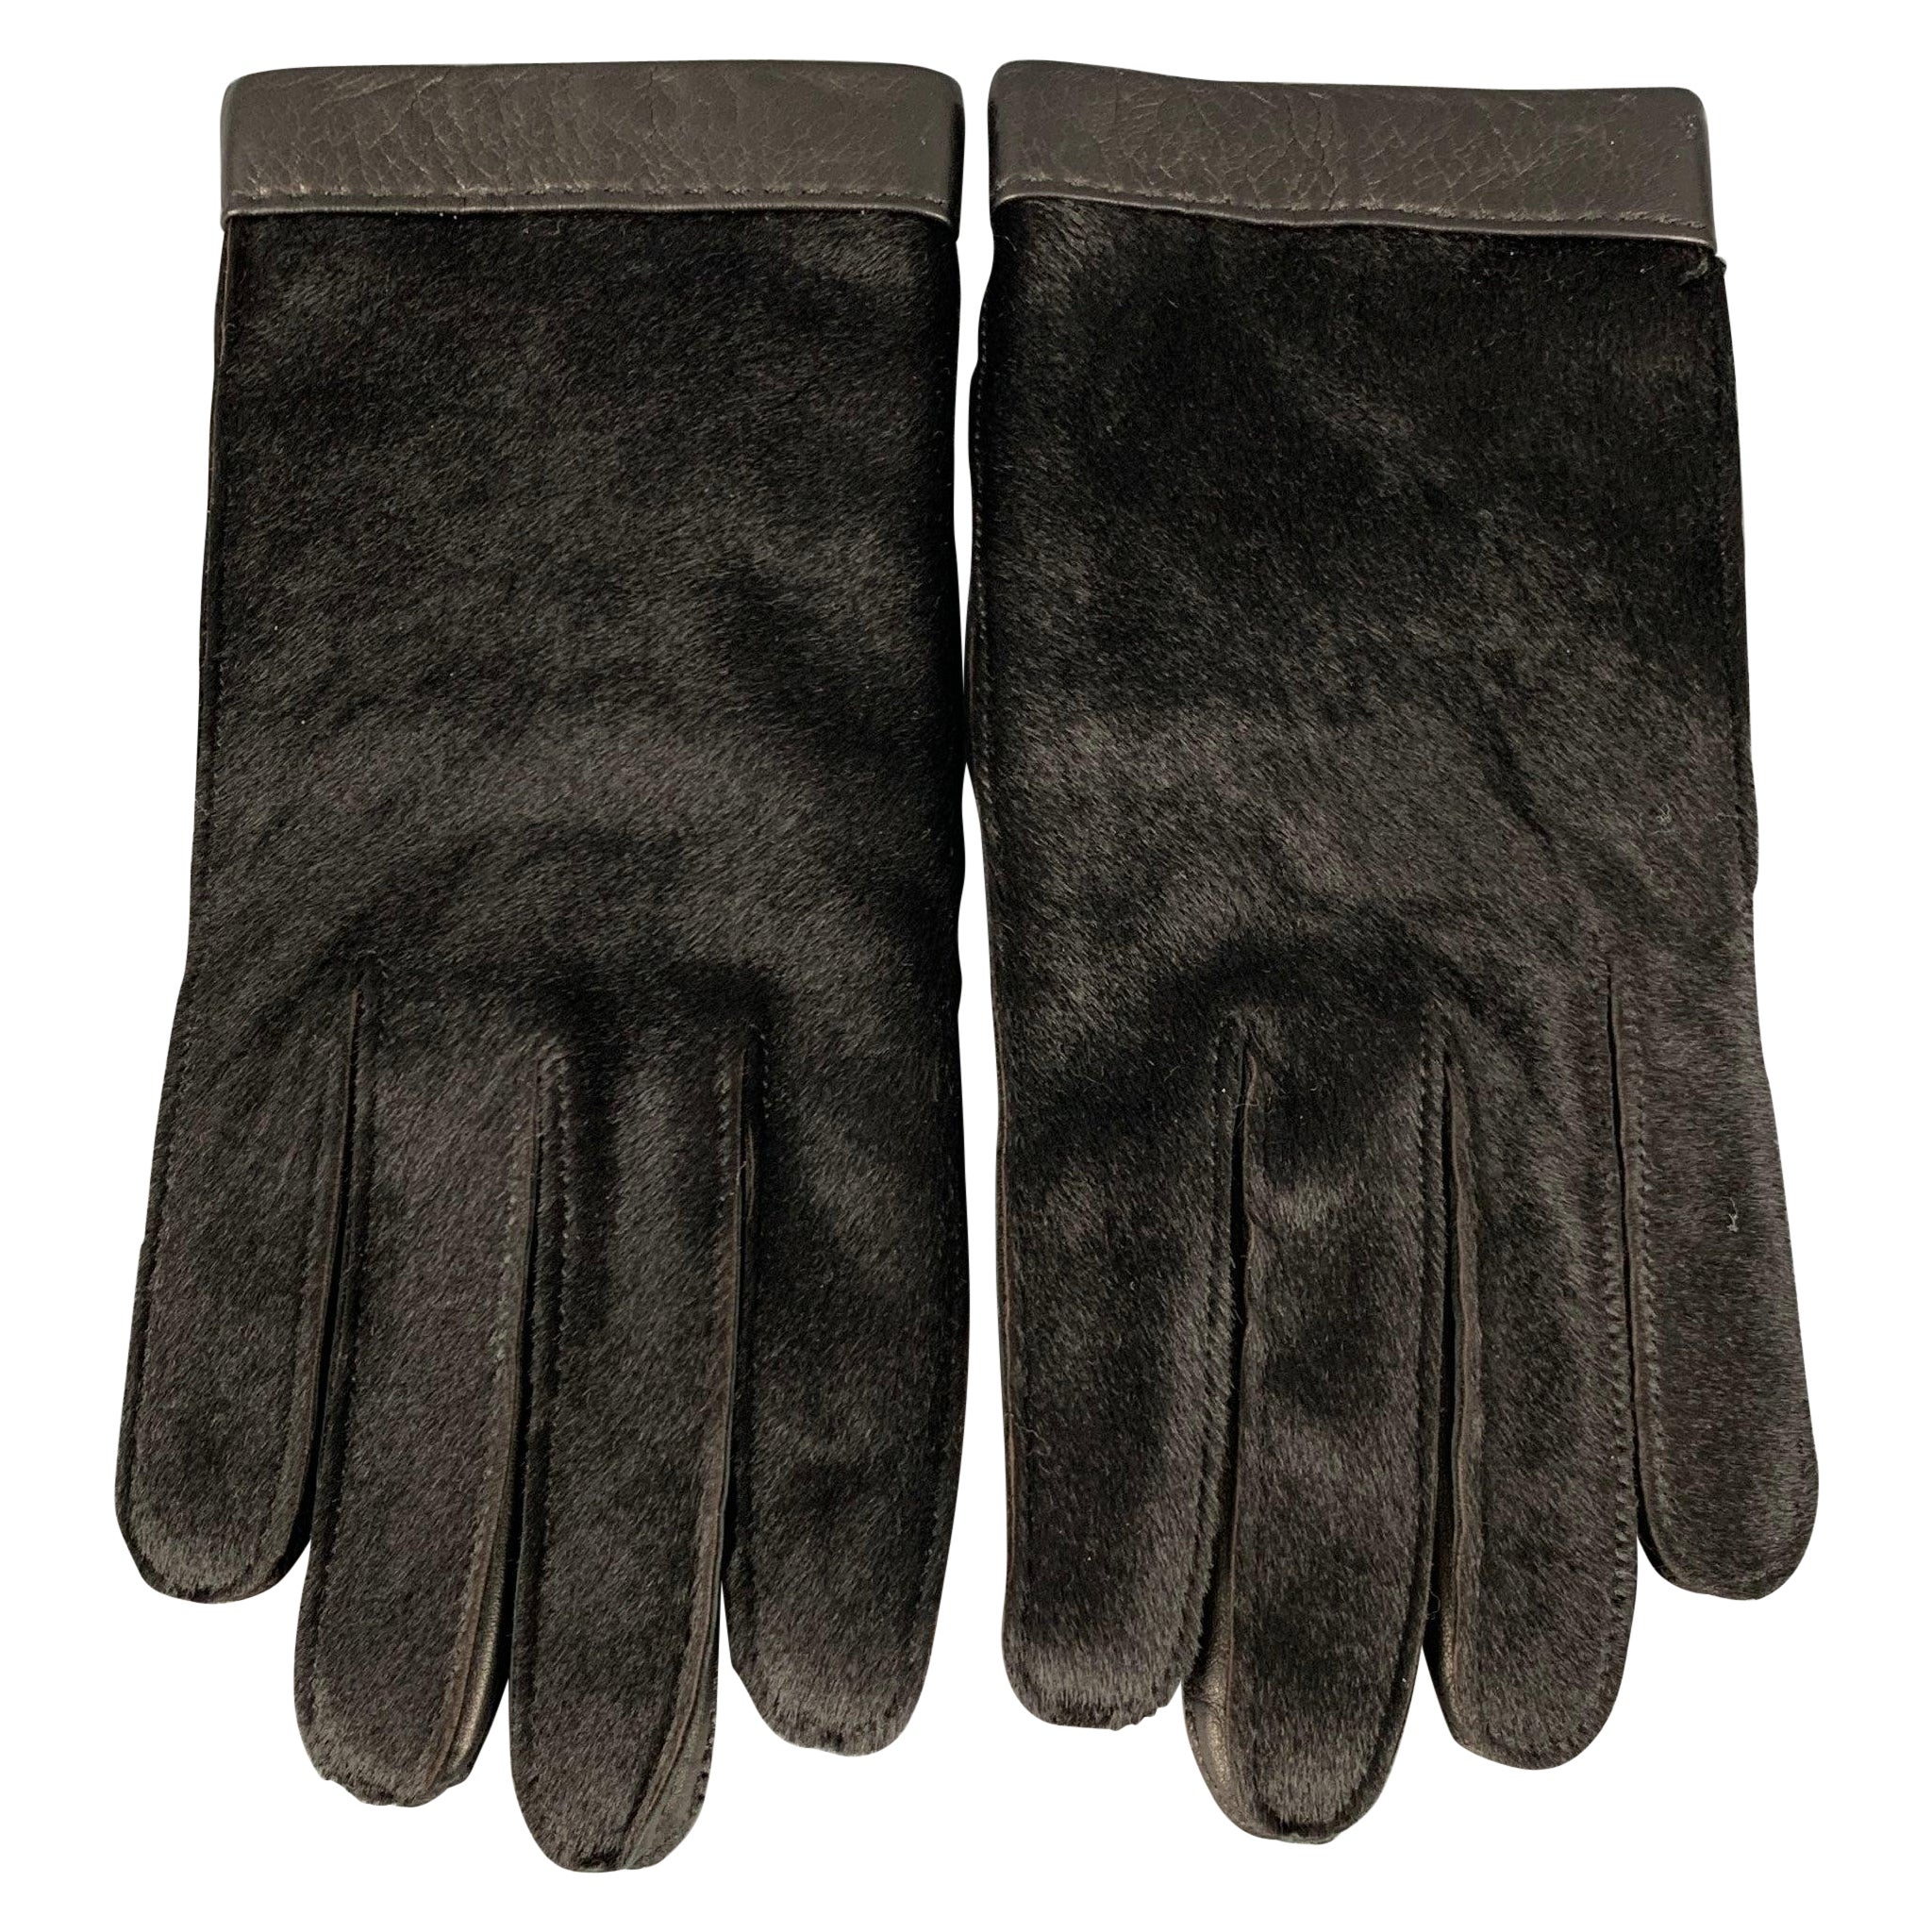 BERGDORF GOODMAN Size 8.5 Black Calf Hair Leather Gloves For Sale